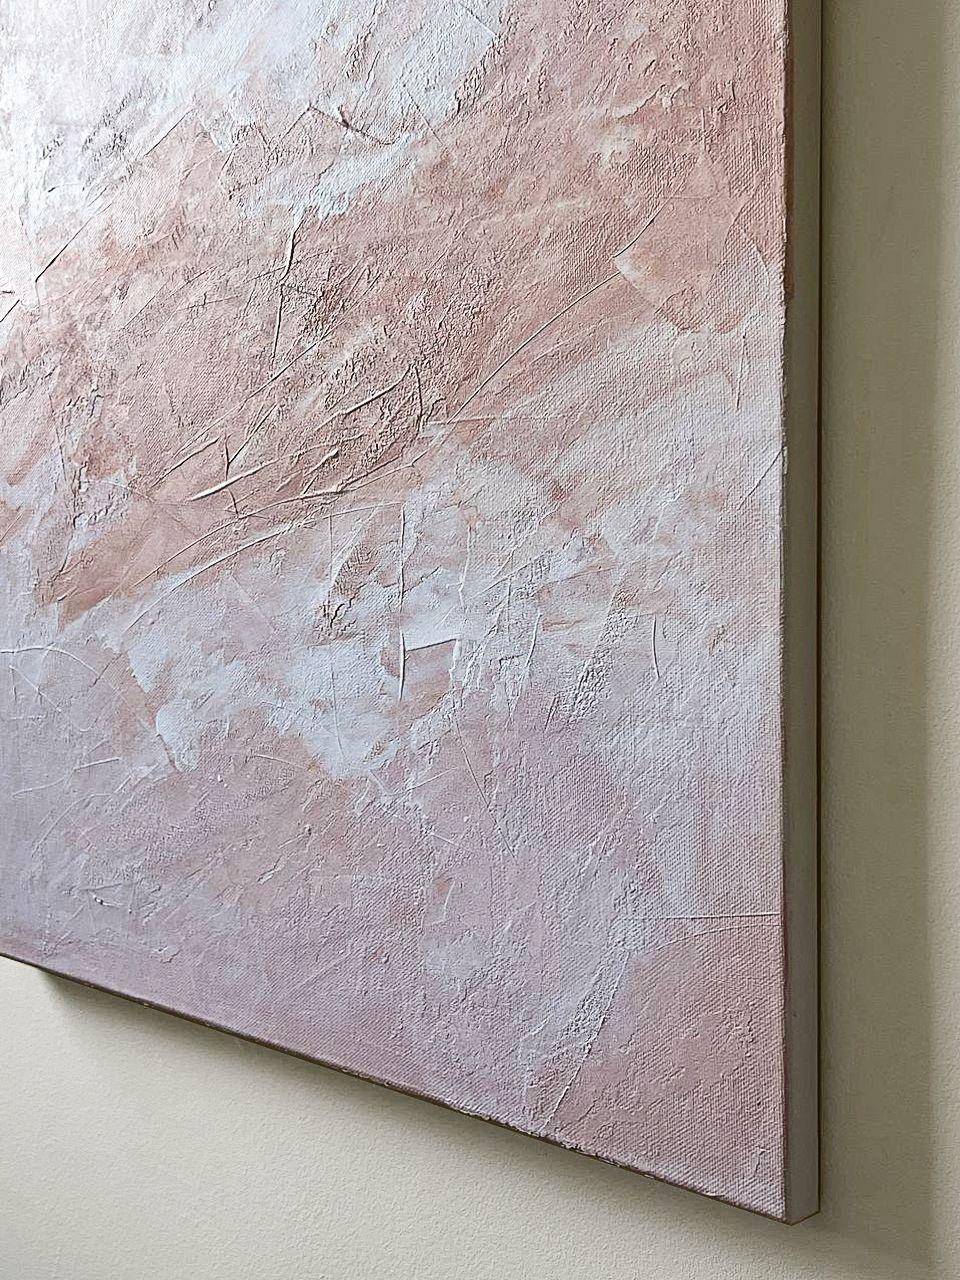 Bright abstract composition inspired by morning light. The picture is made with a spatula with acrylic paints in several layers, creating an interesting uneven structure. The colors are light, dominated by pink, which is broken with white. The